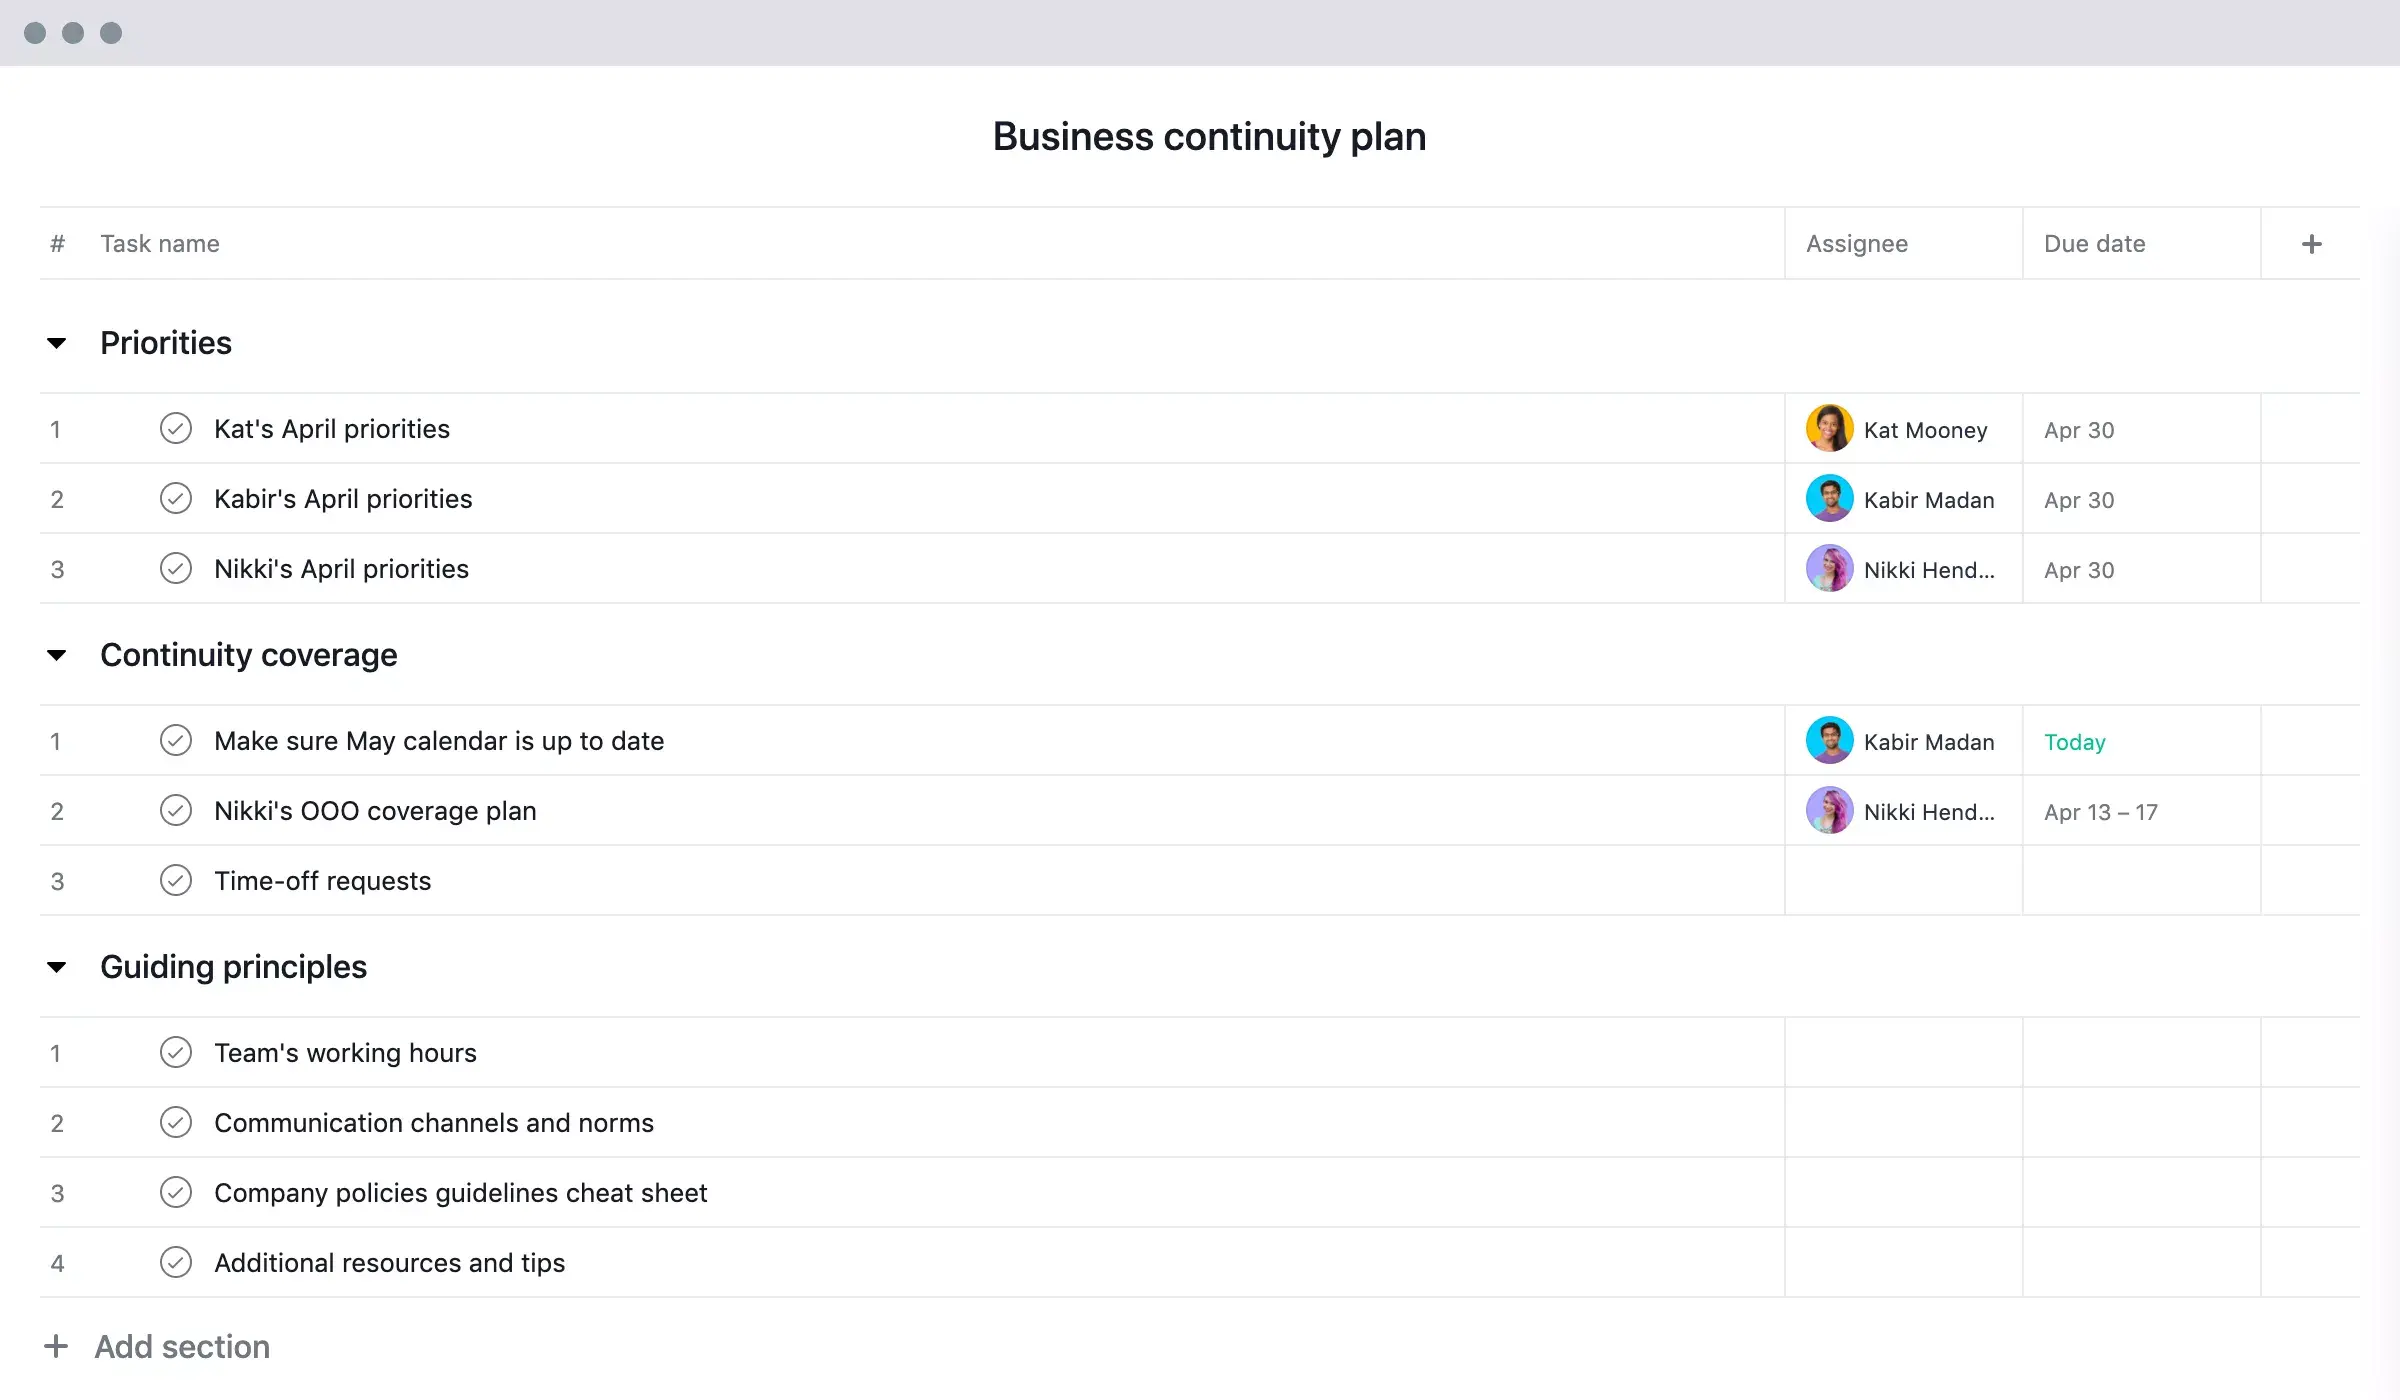 [old Product UI] Business continuity plan (example)